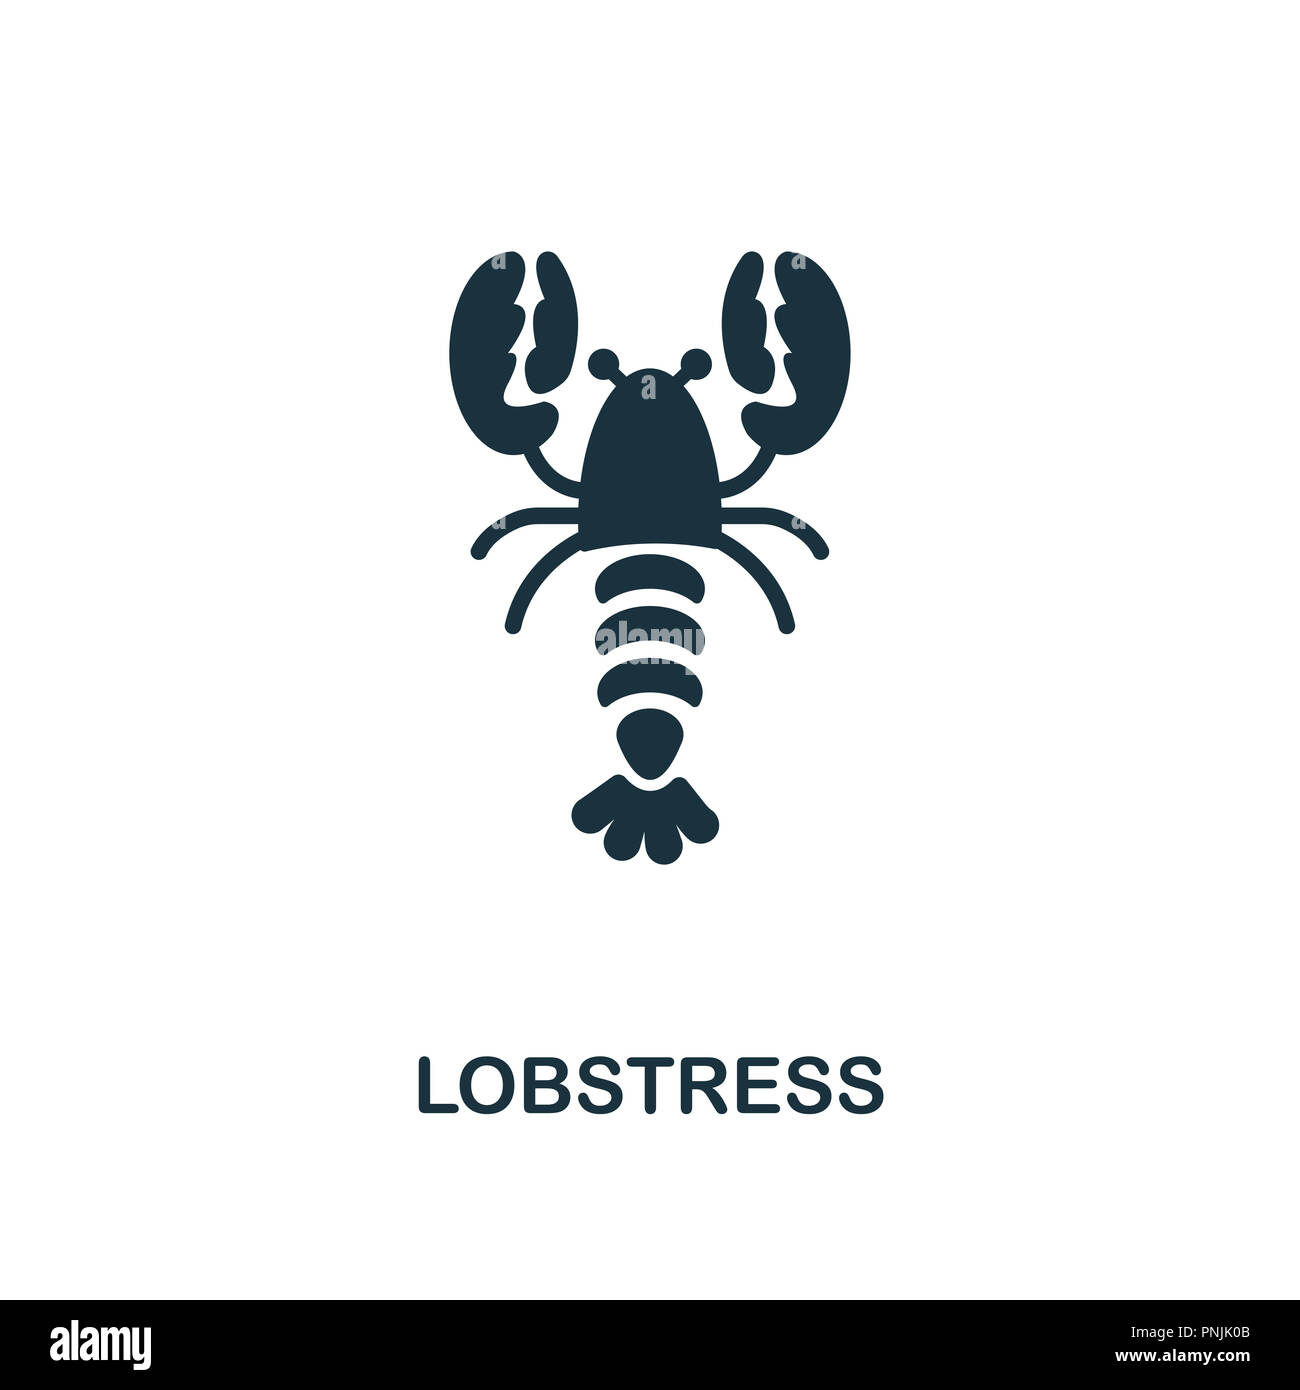 Lobster icon. Monochrome style design. UI. Pixel perfect simple pictogram lobster icon. Web design, apps, software, print usage. Stock Photo